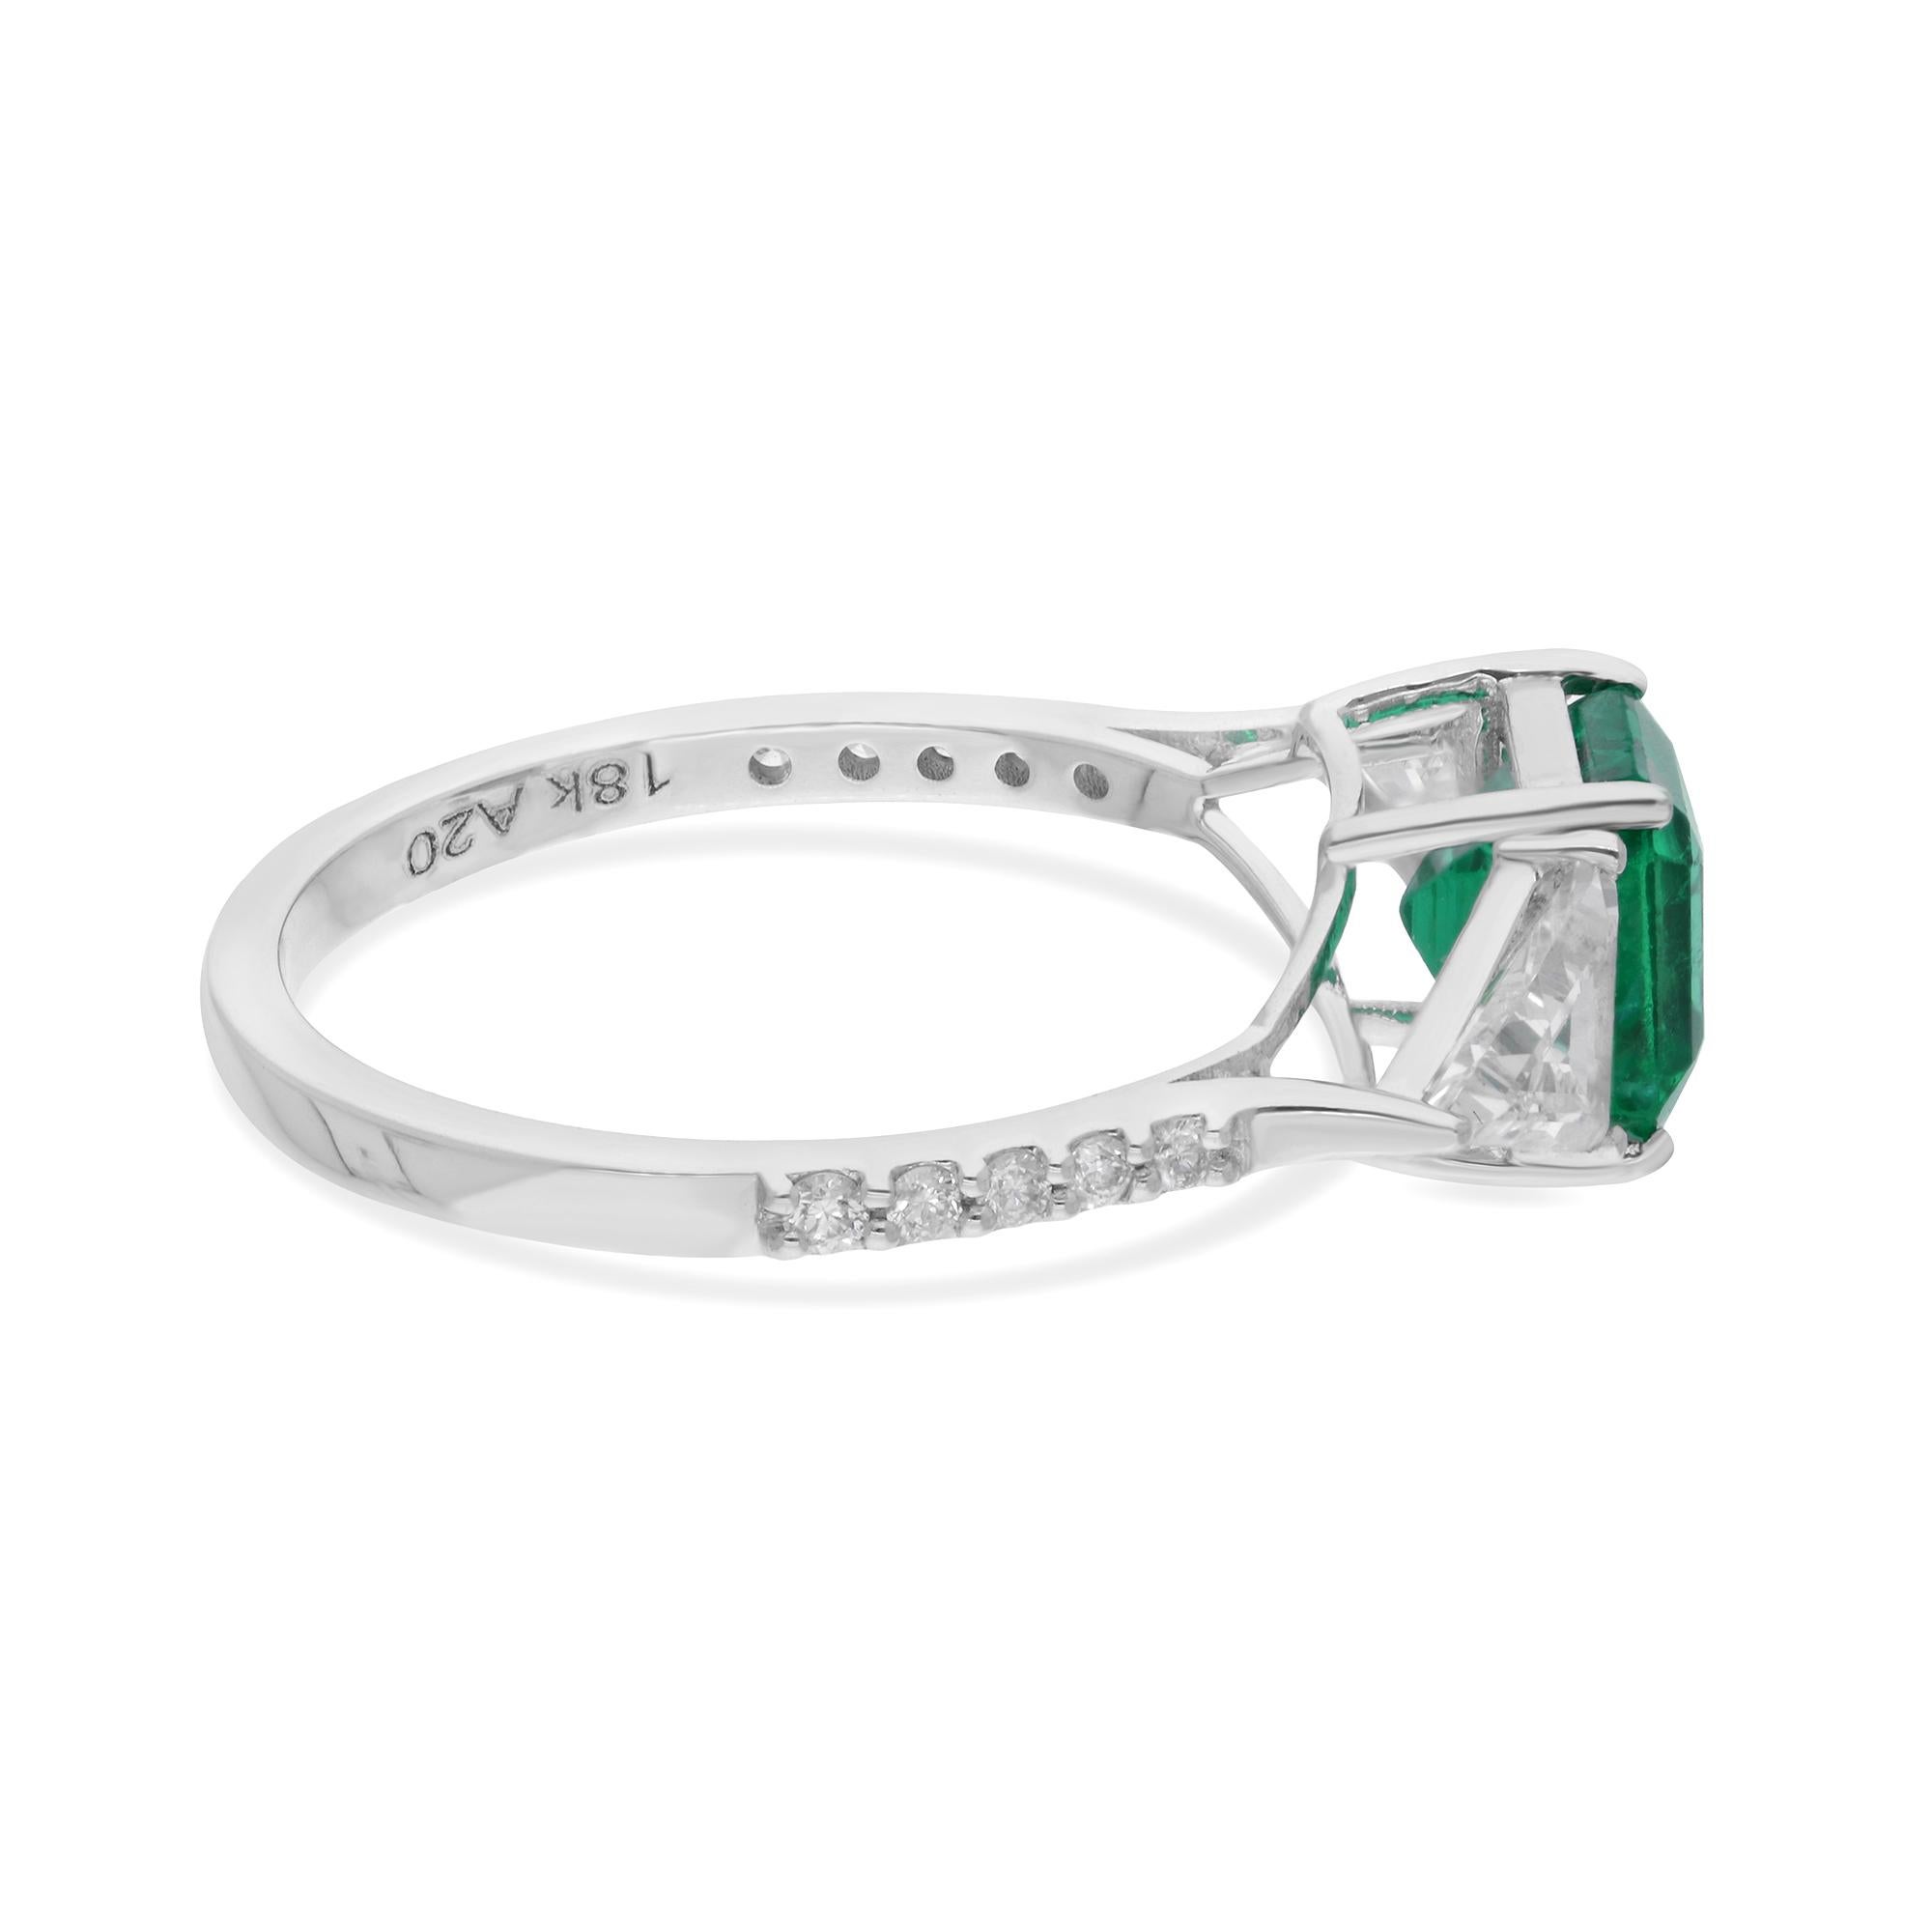 At the heart of the ring lies a mesmerizing Zambian emerald gemstone, renowned for its vibrant green hue and exceptional clarity. The emerald exudes a sense of natural allure and luxury, capturing the eye with its radiant presence. Surrounding the